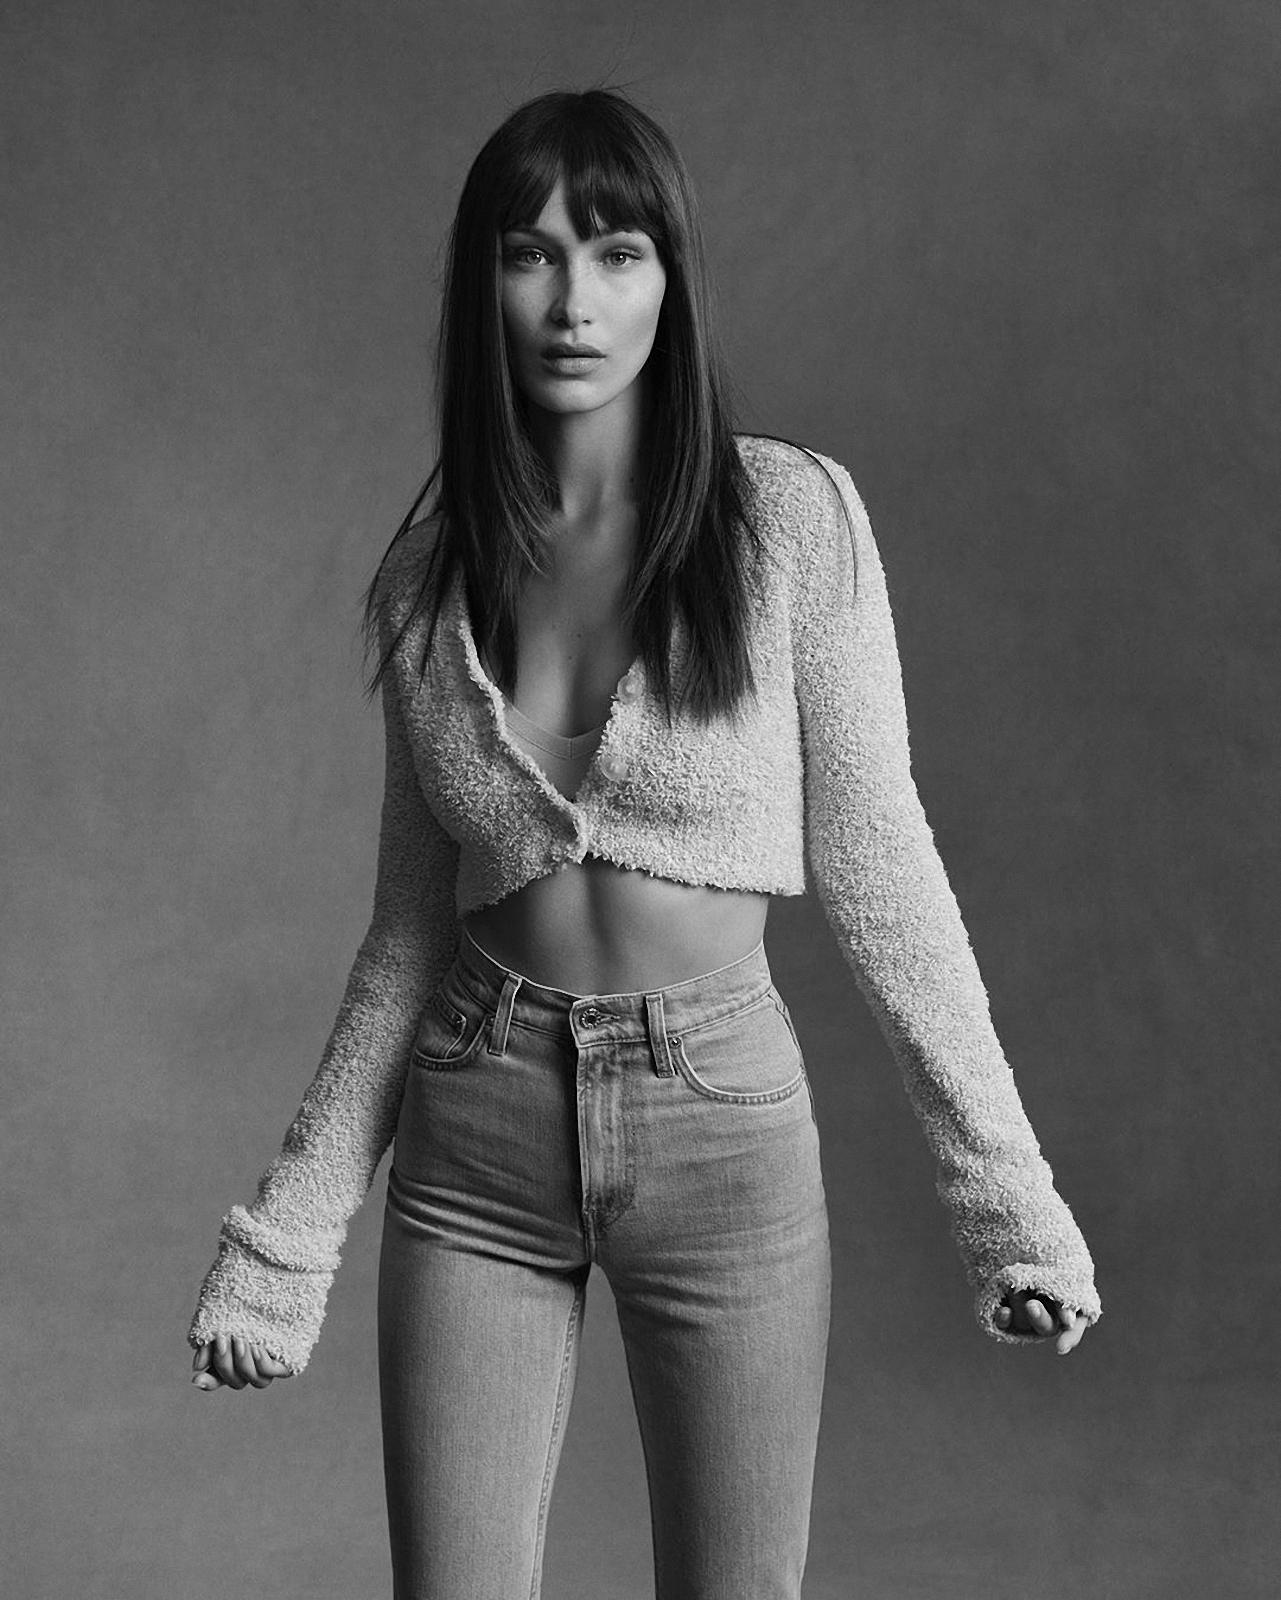 Photos n°4 : Bella Hadid in Black and White!